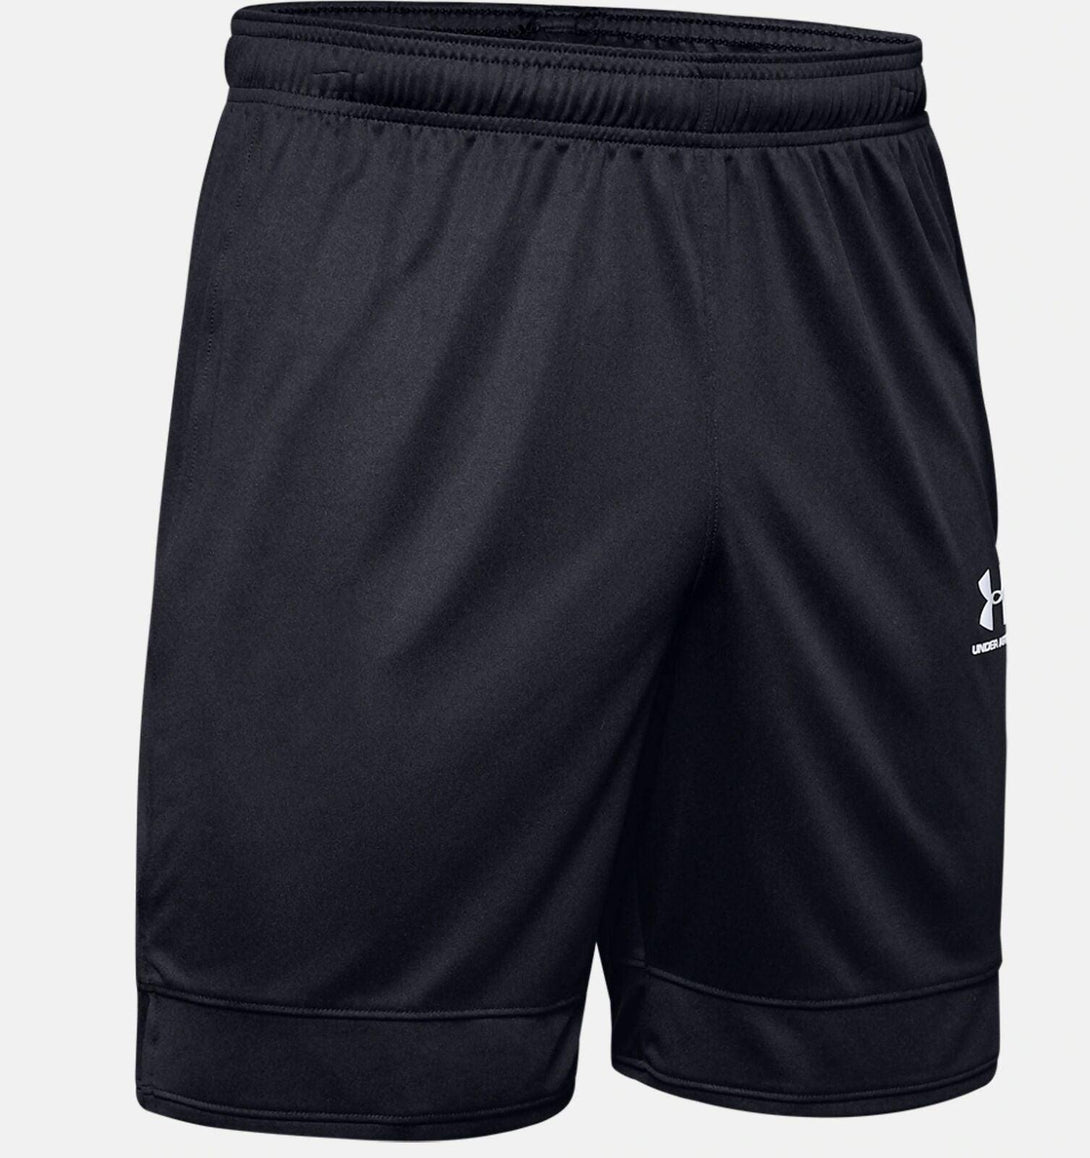 Rugby Heaven Under Armour Challenger III Knit Shorts - www.rugby-heaven.co.uk